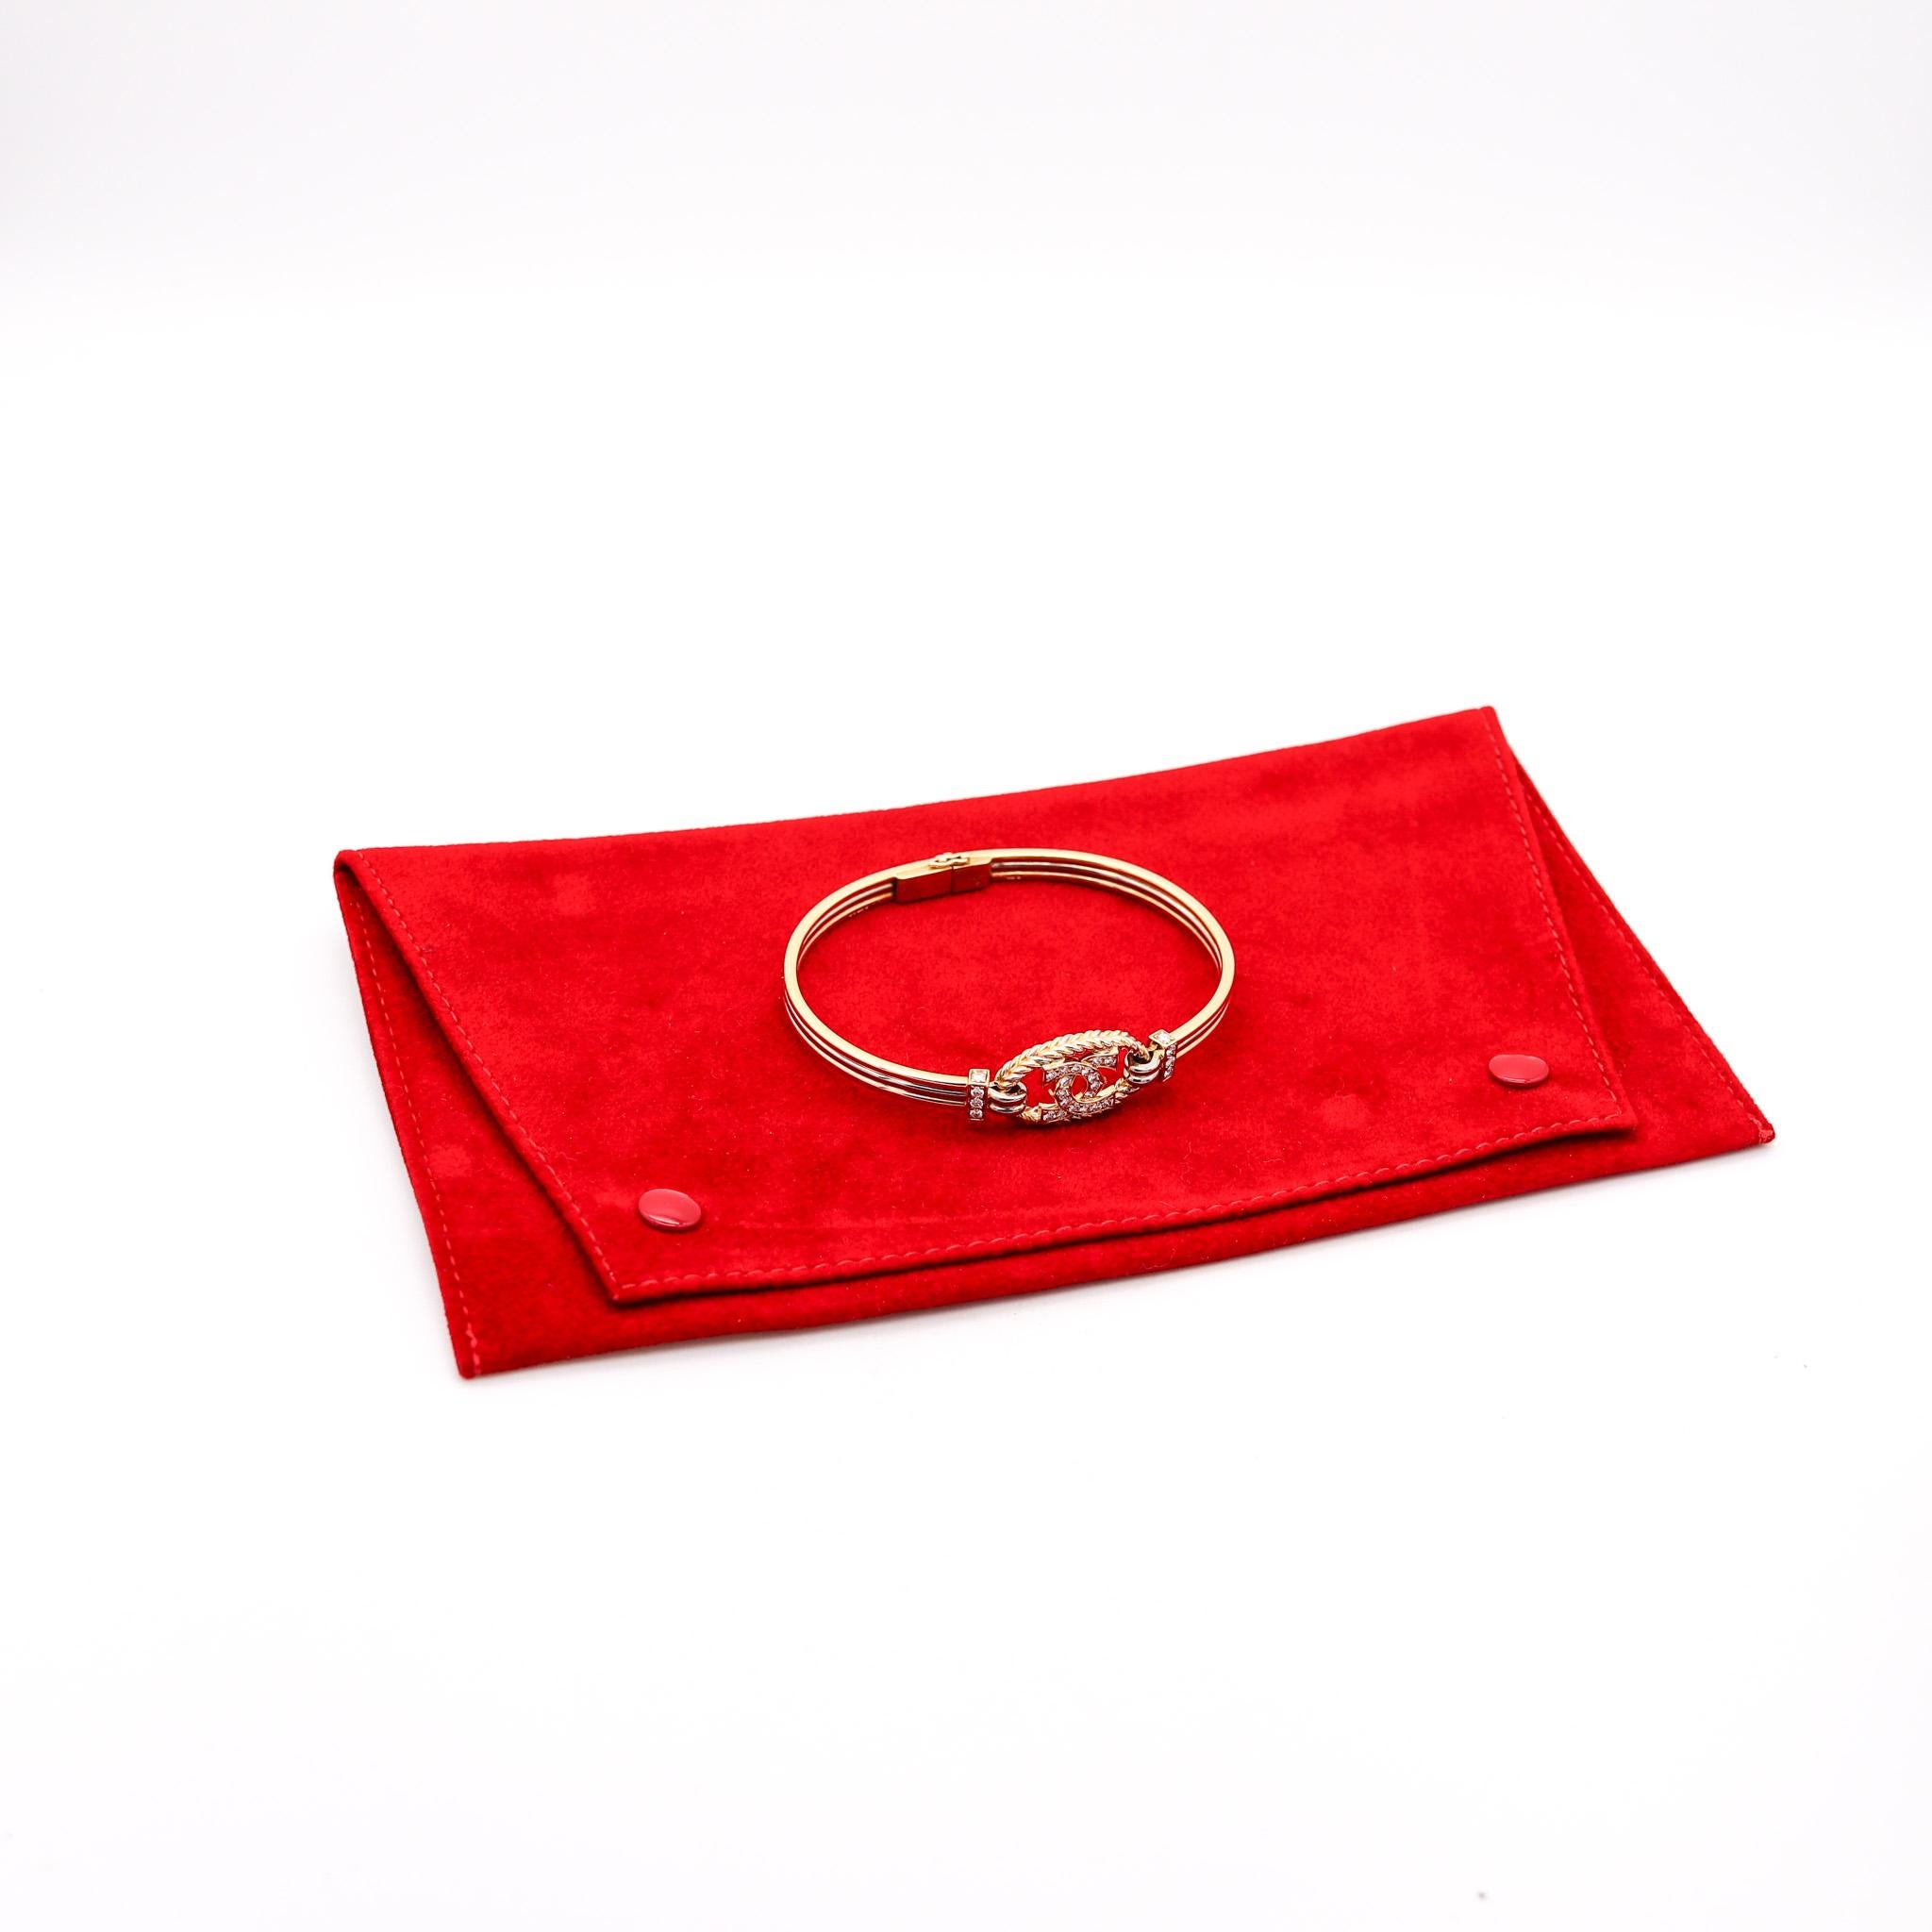 Bangle Bracelet designed by Cartier London.

A rare three color trinity bangle bracelet, created in London England by the jewelry house of Cartier, back in the 1987. This bracelet has been crafted in three colors of solid gold of 18 karats with high